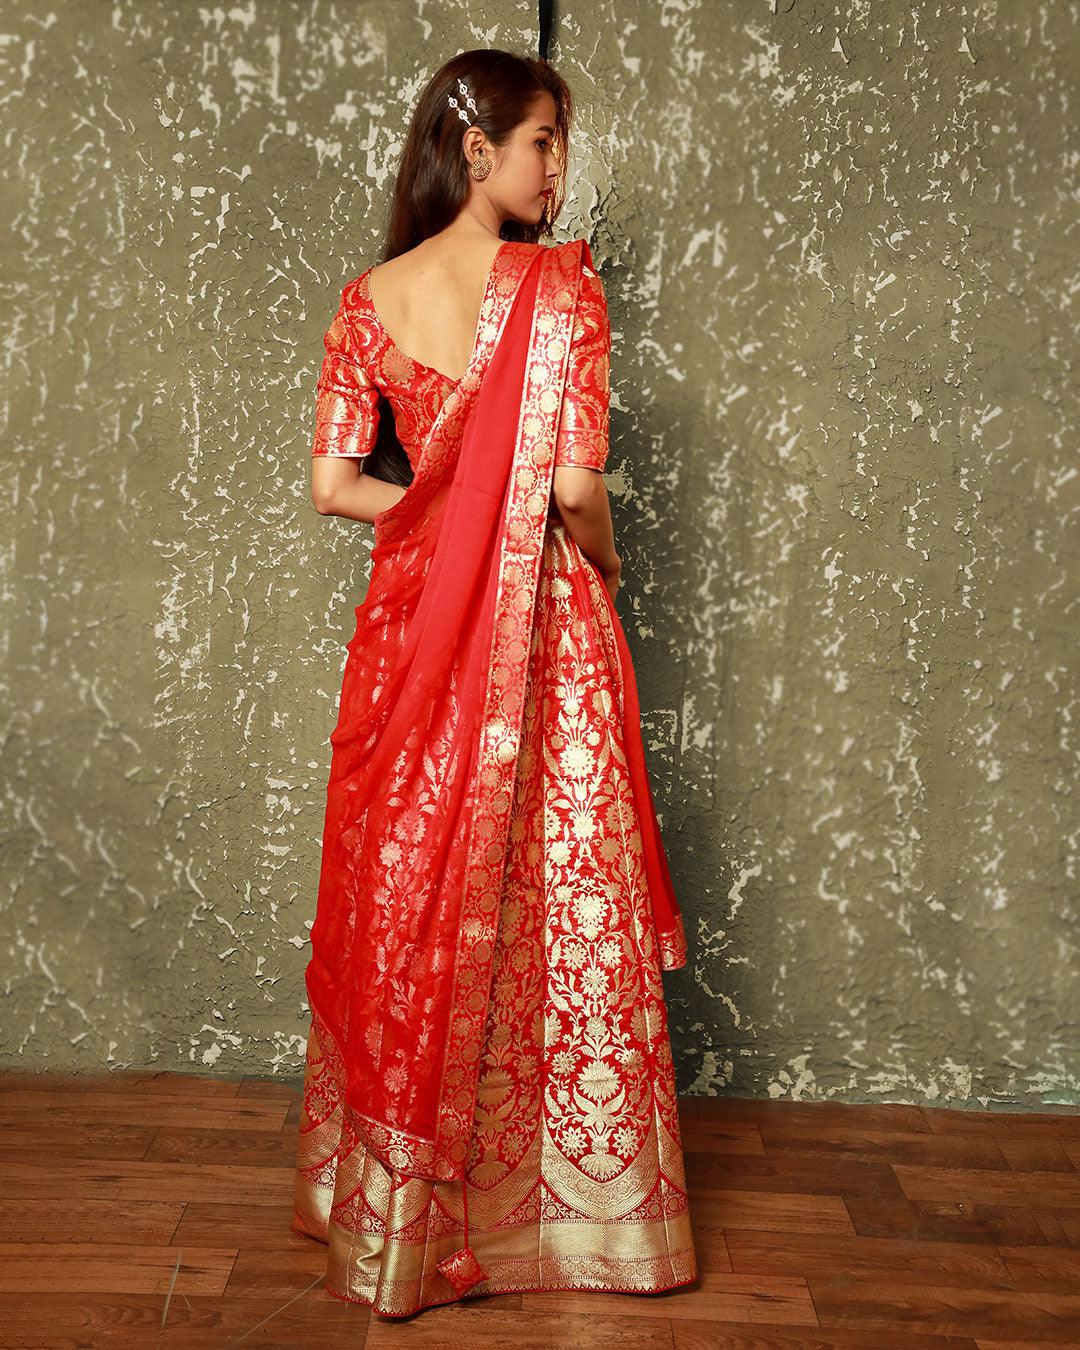 Red lehenga matched with gold embroidered blouse on Kalki